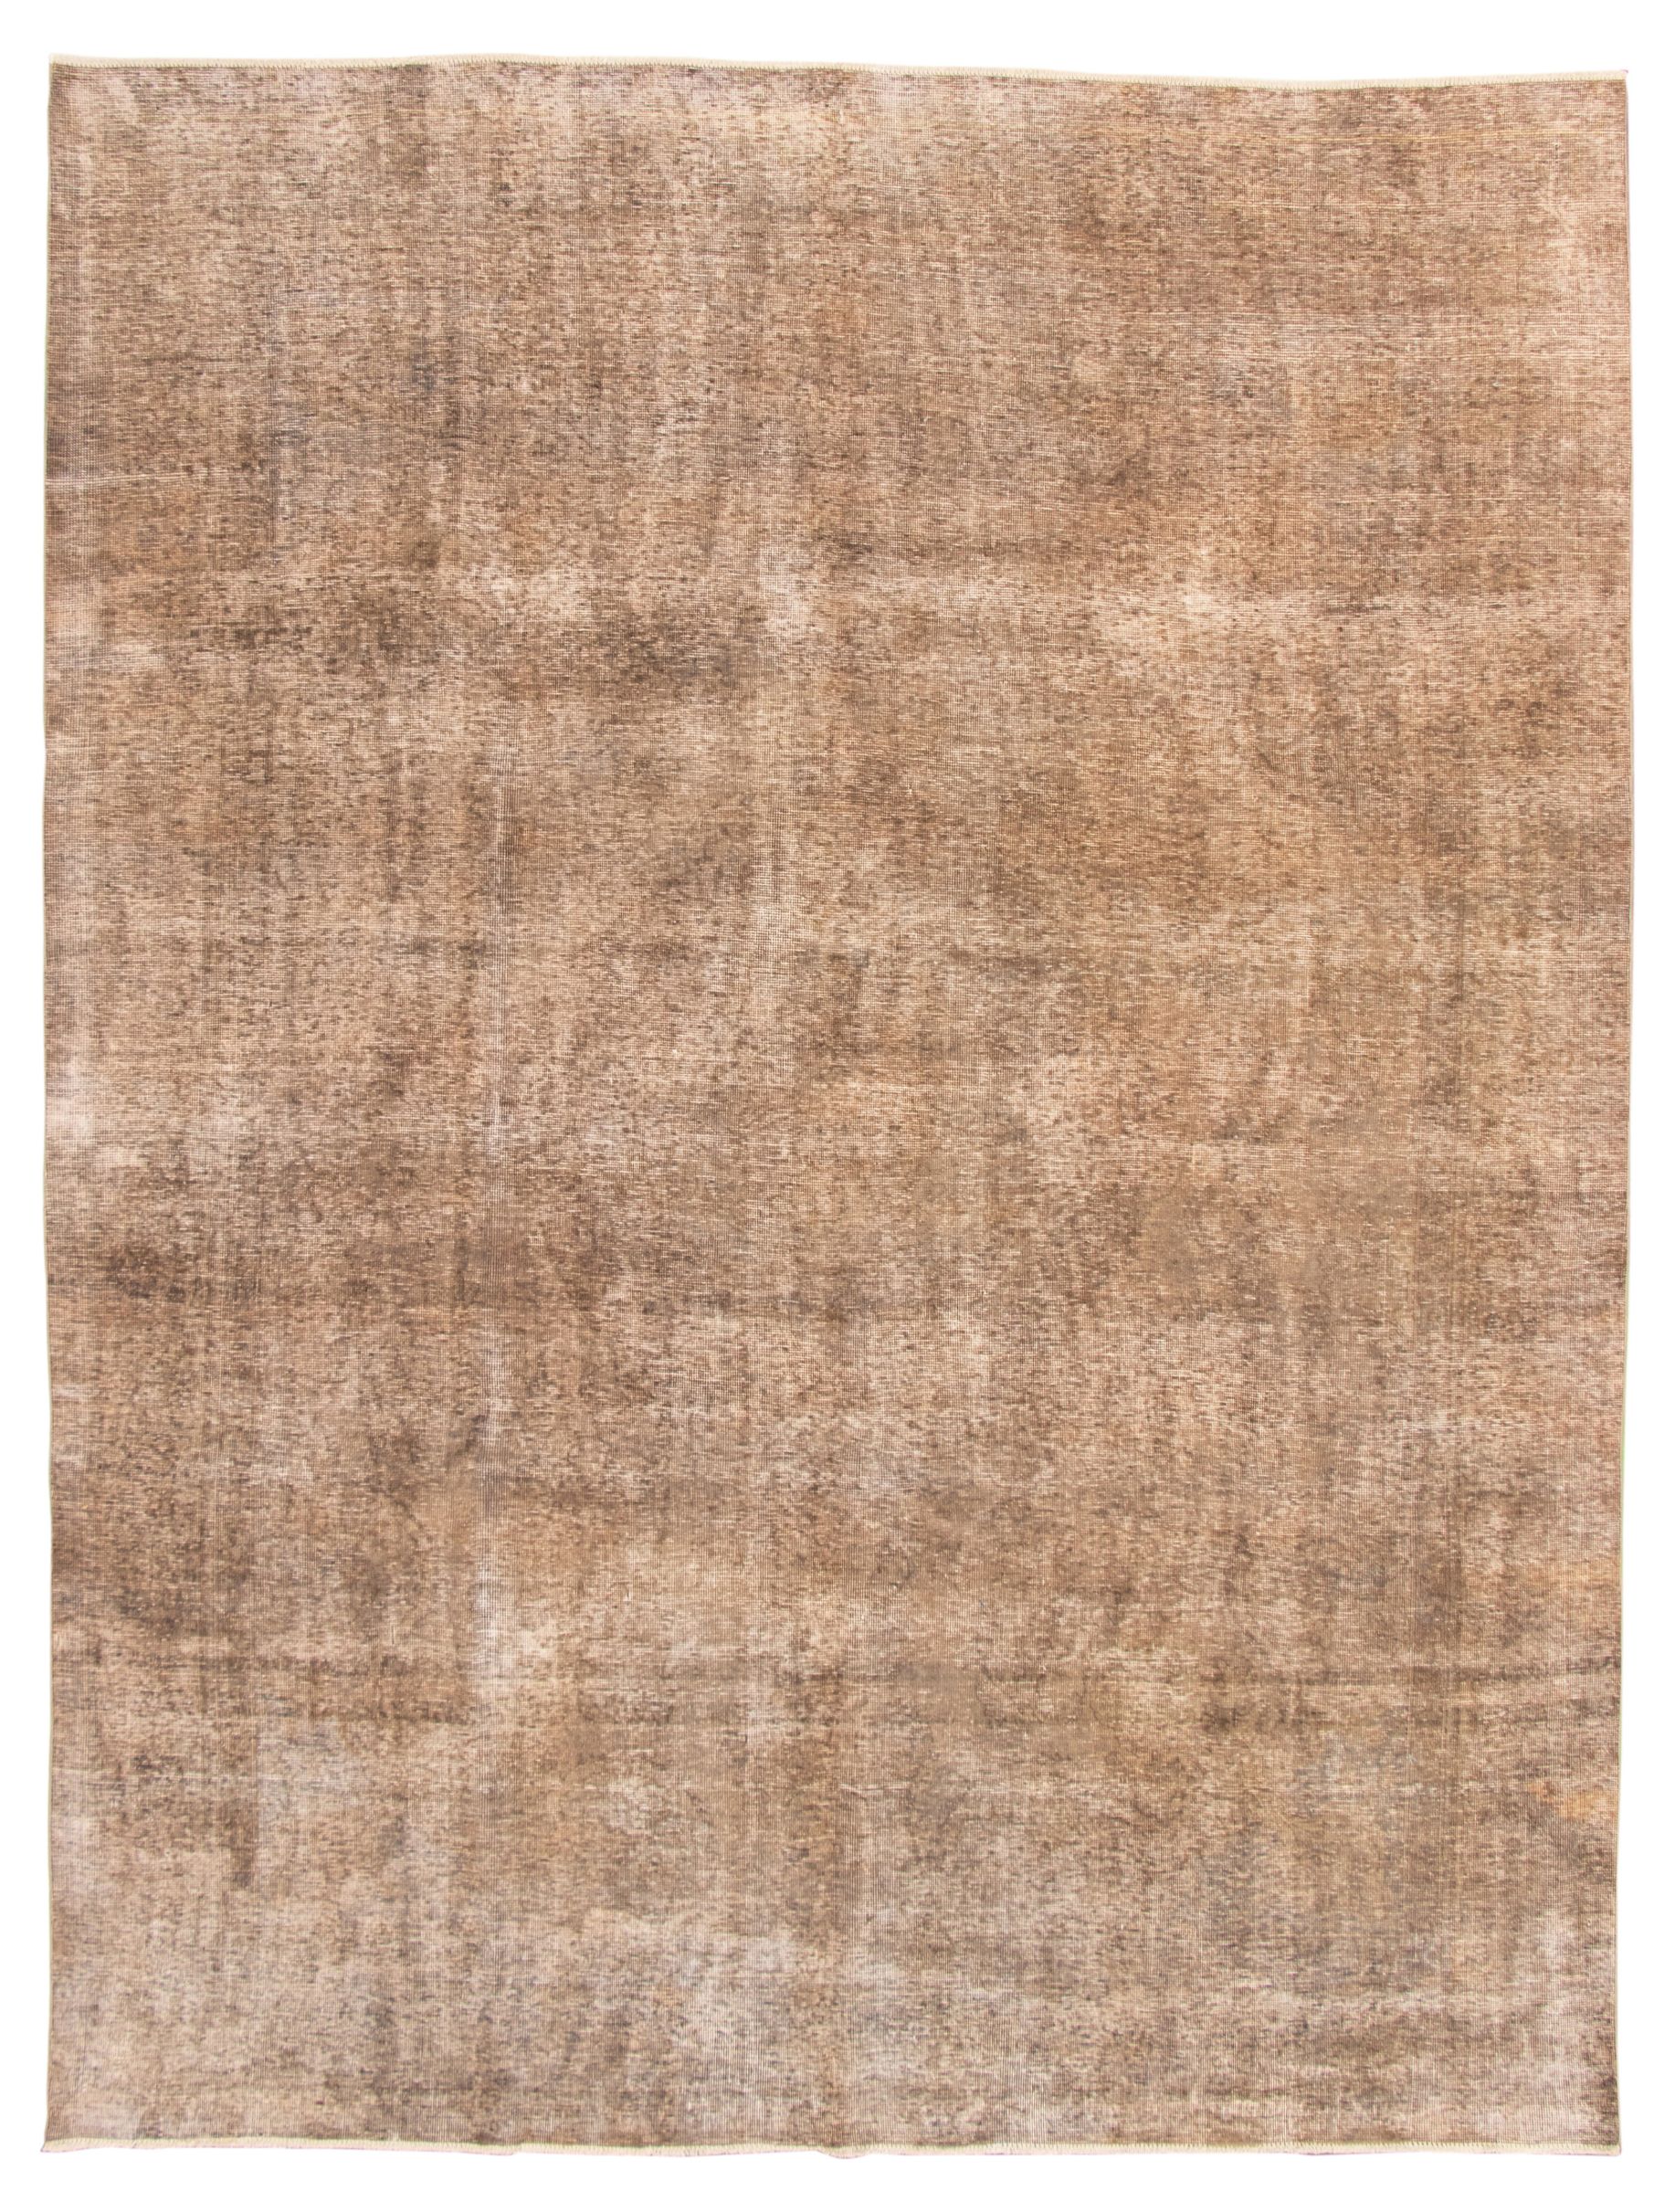 Hand-knotted Color Transition Brown Wool Rug 9'5" x 12'6" Size: 9'5" x 12'6"  